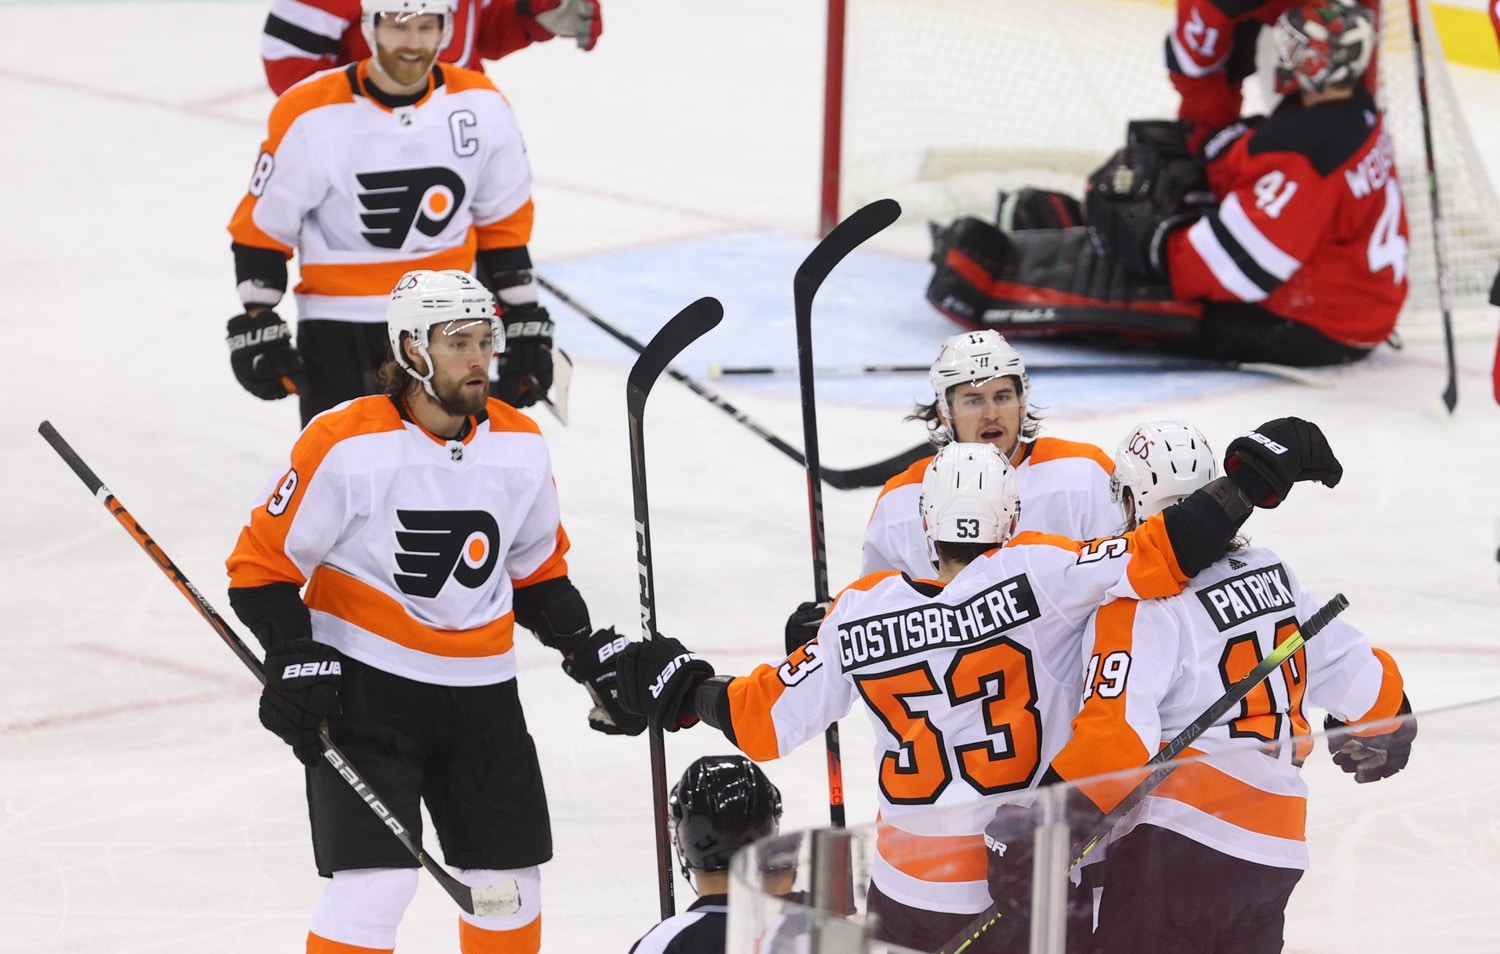 Goalie Controversy? – Observations from Flyers 5, Devils 3